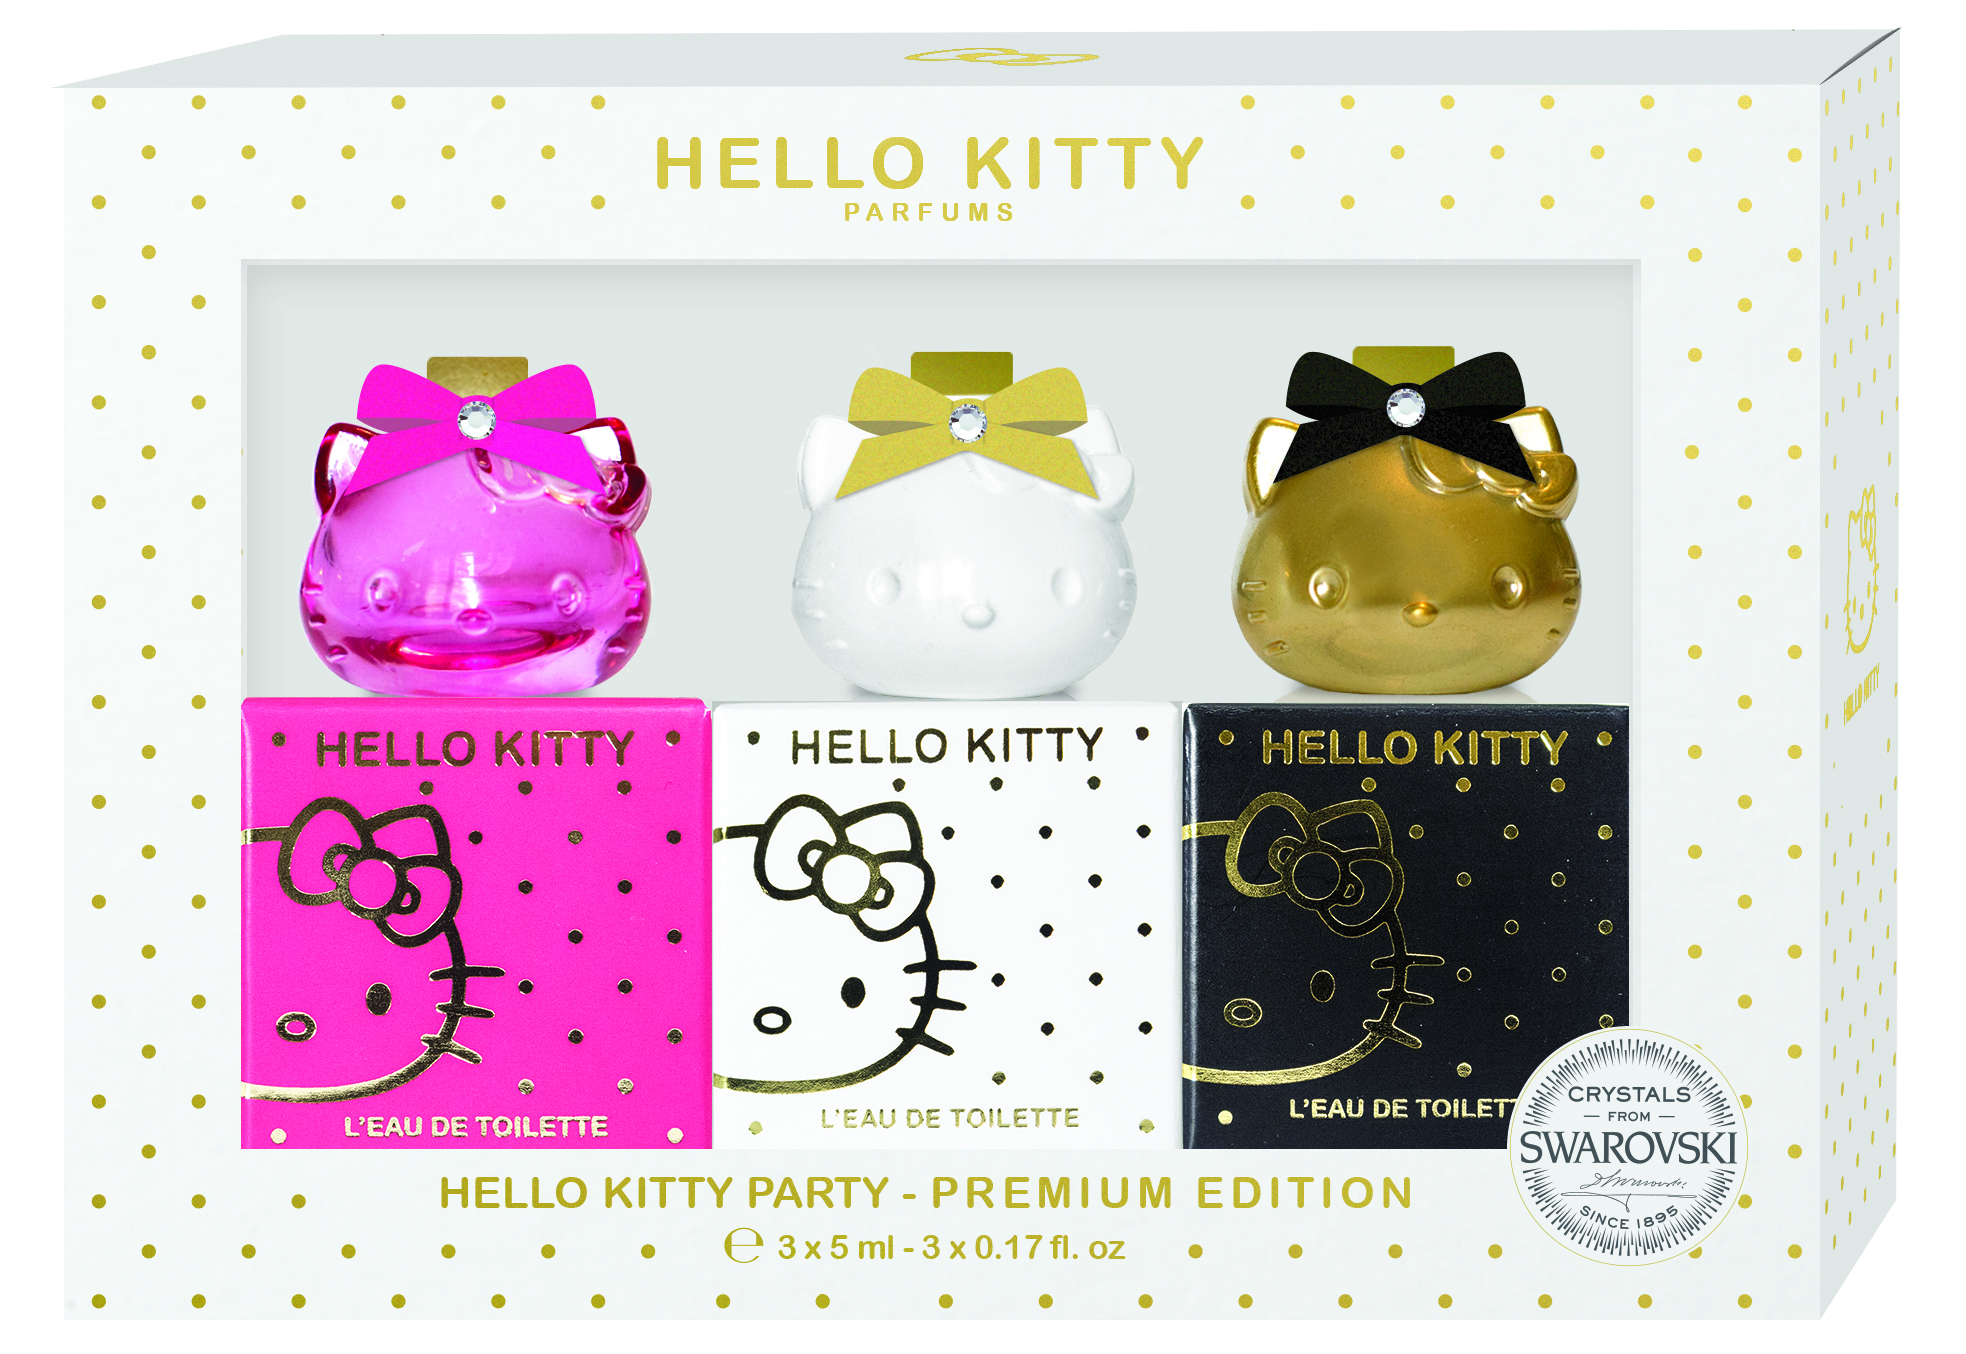 The Swarovski-embellished Hello Kitty Party Miniatures Set Premium Edition contains an exclusive pink version 